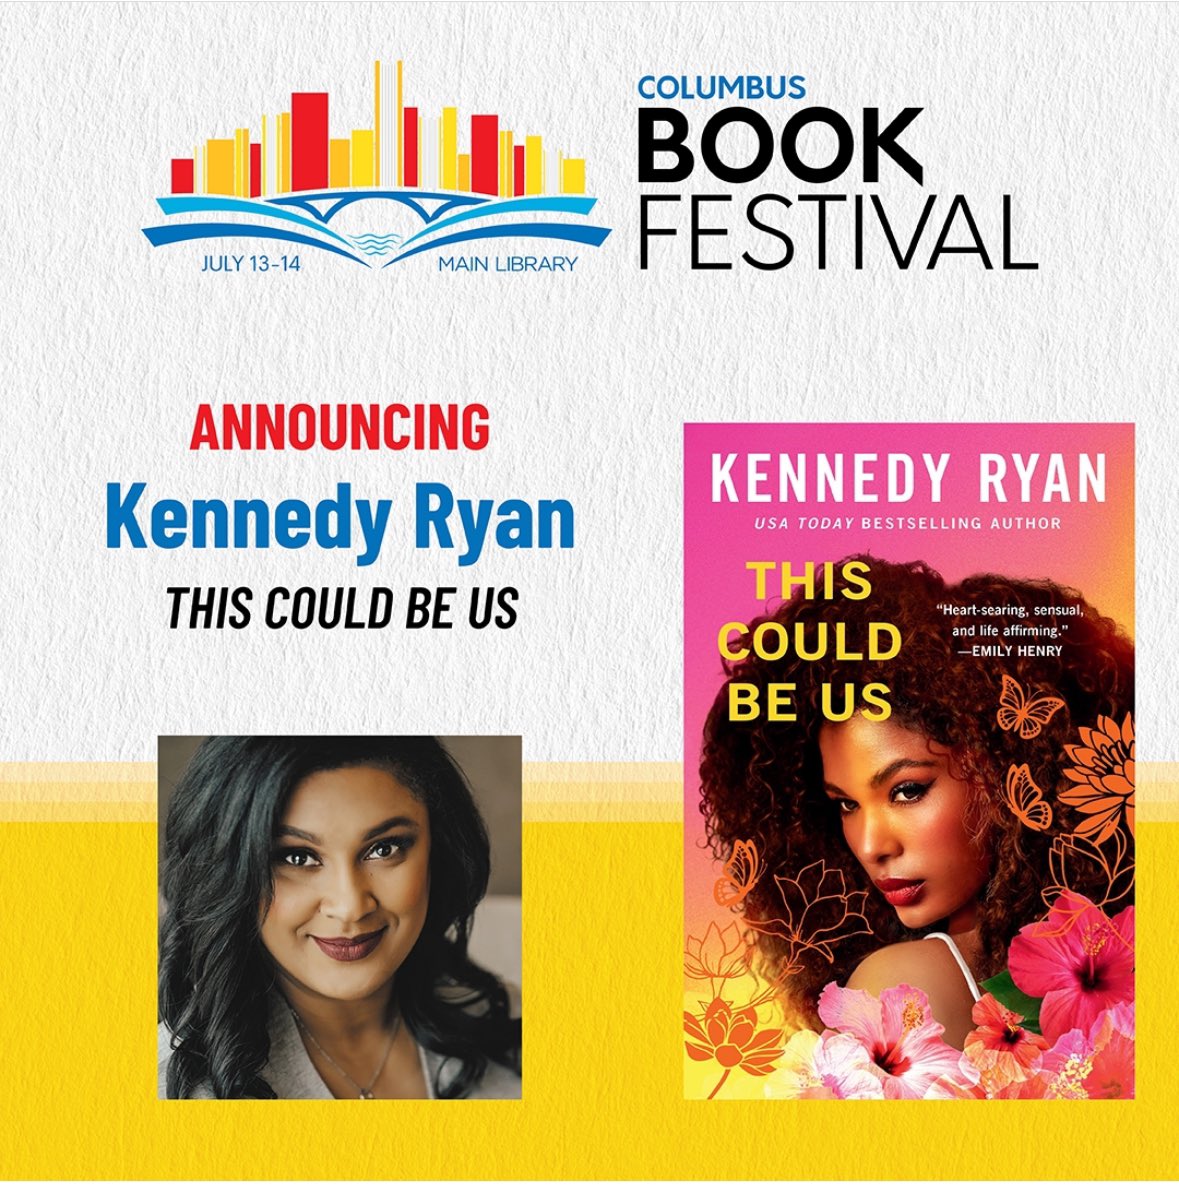 OHIO! I’m coming July 13 to the Columbus Book Festival! Free & open to the public. Will I see you?? 🔗 columbusbookfestival.org?